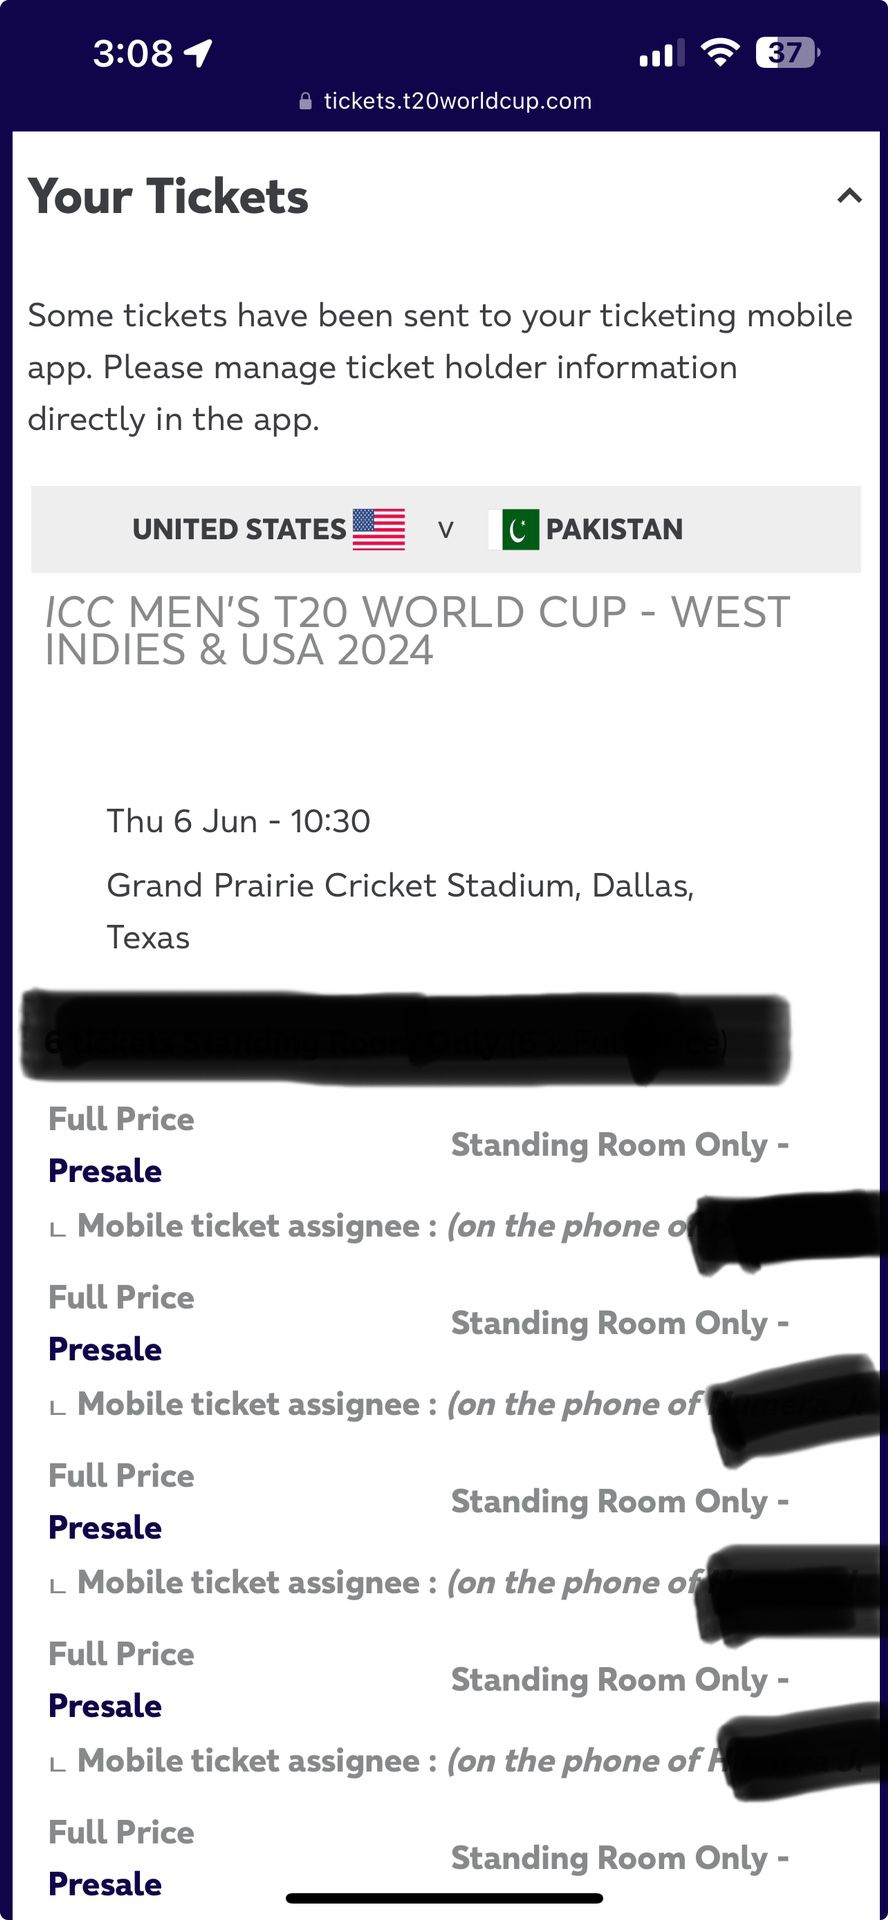 Pakistan Vs Usa T20 Worldcup Tickets 